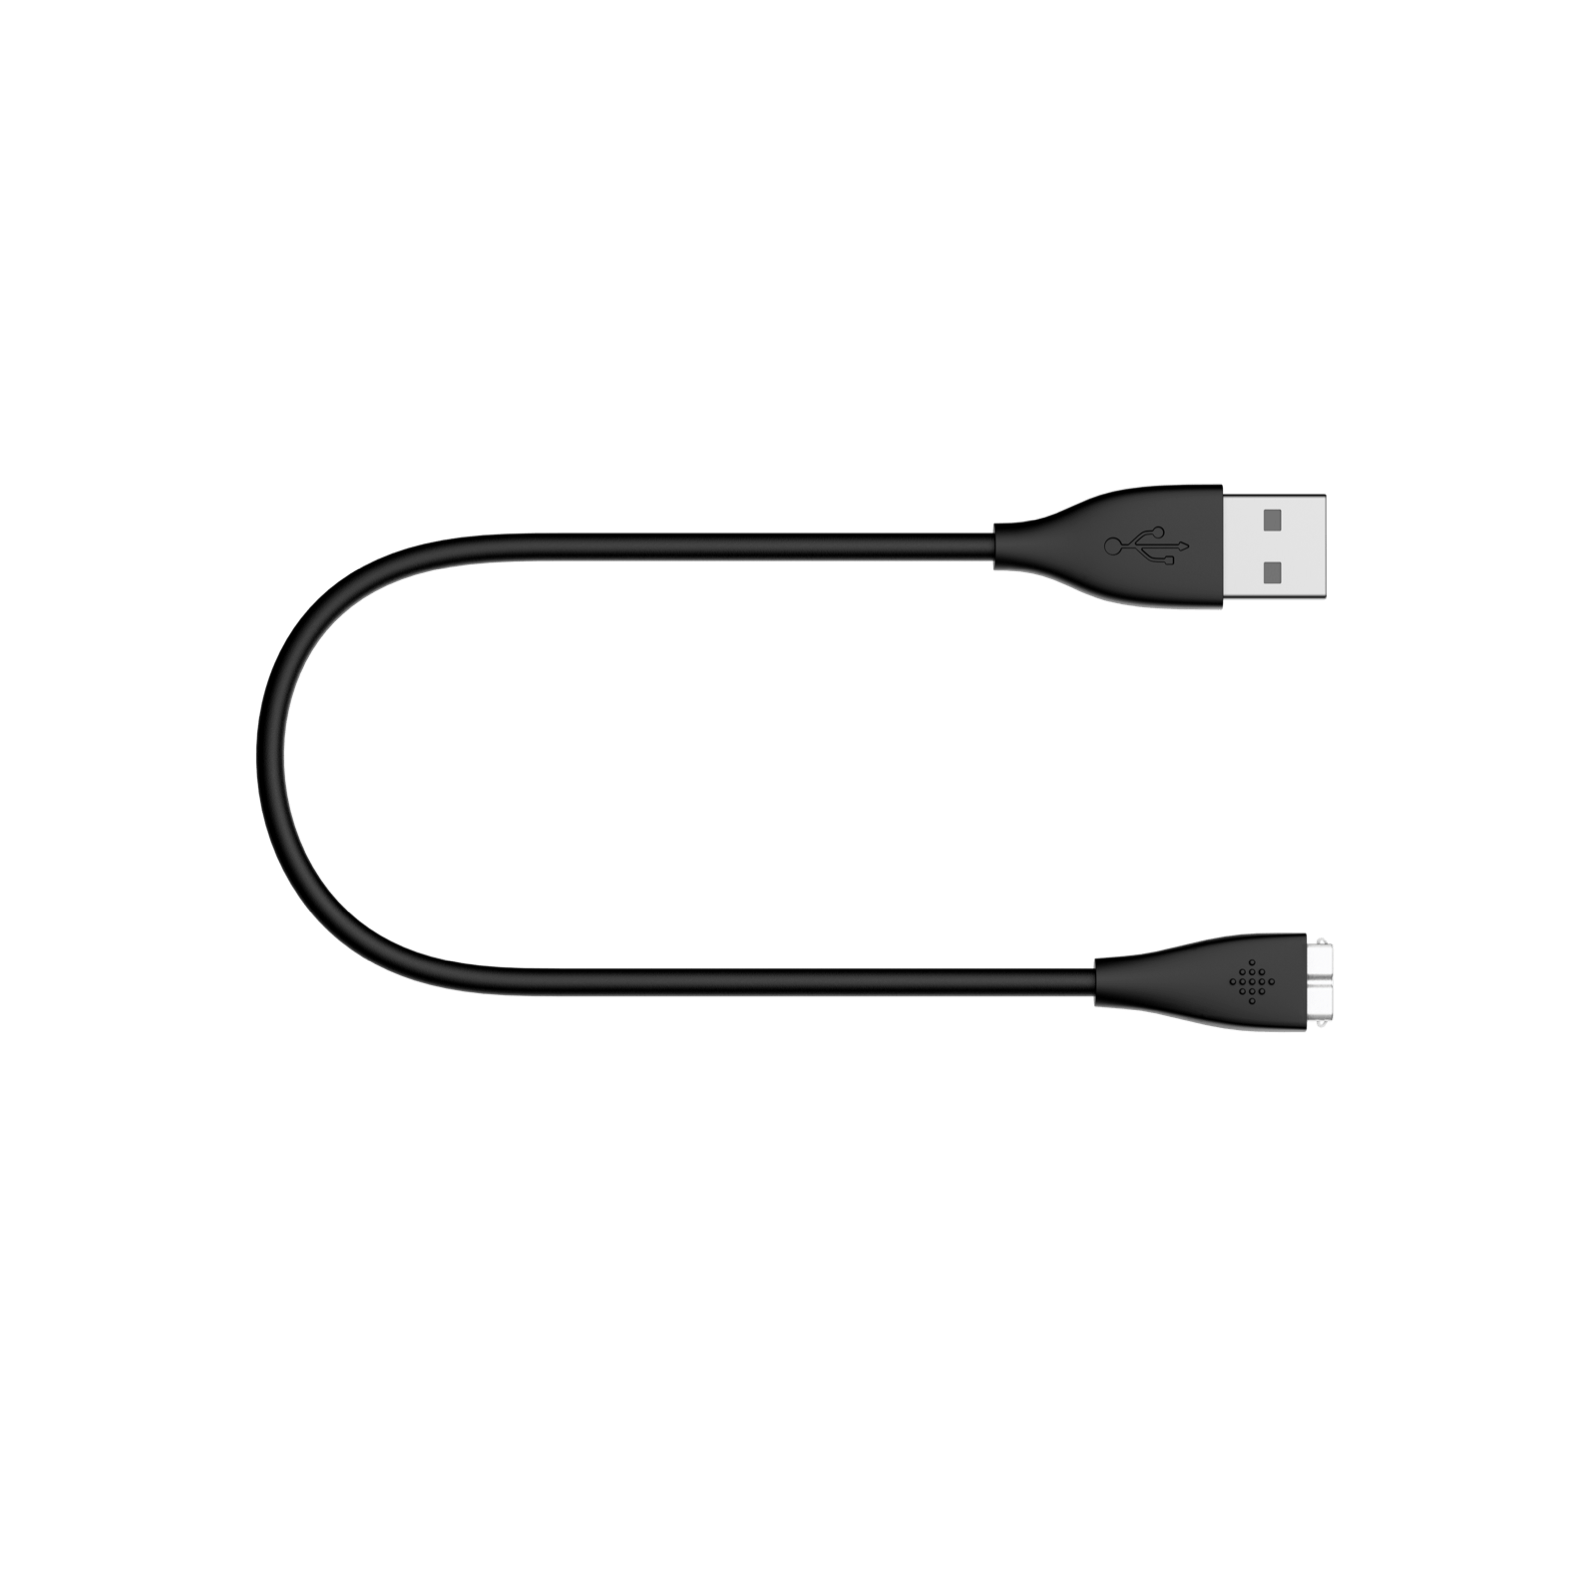 NEW ORIGINAL FITBIT CHARGE HR charging USB cable 